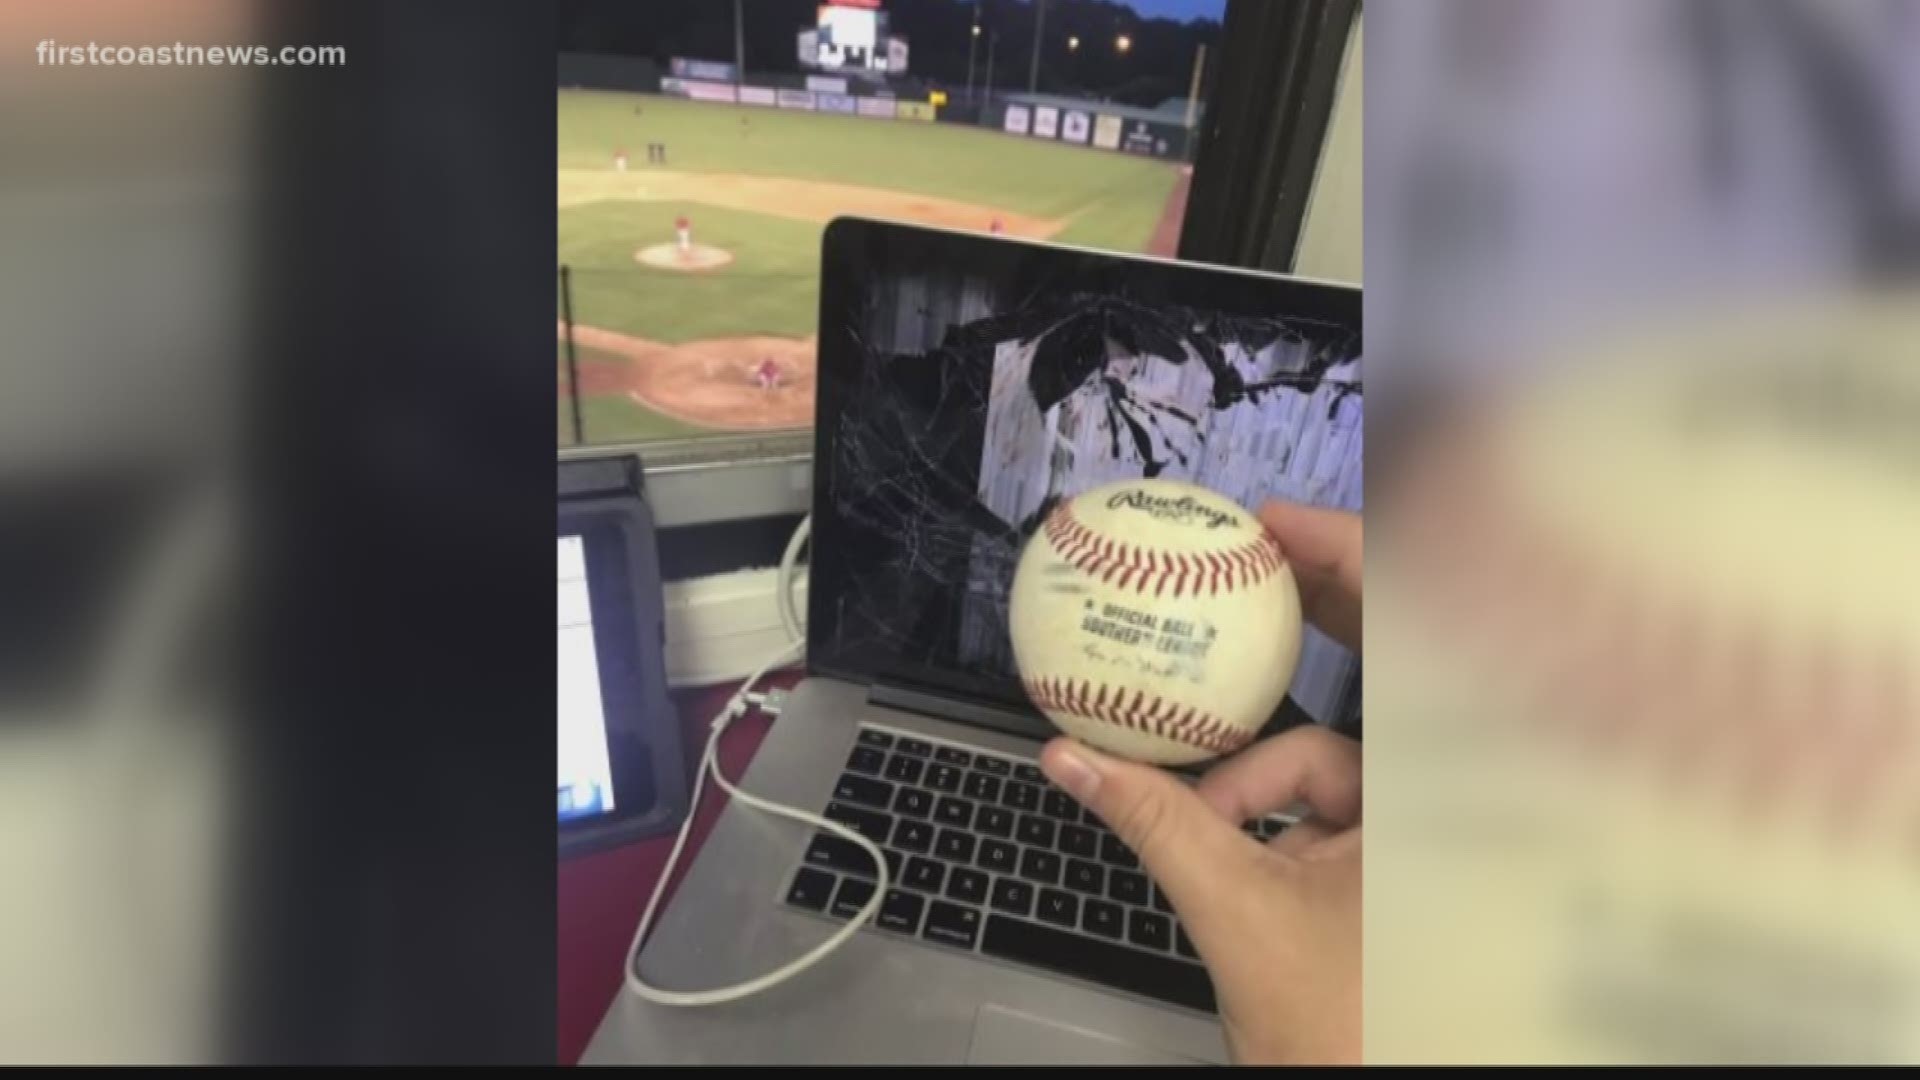 Roger Hoover was on call Wednesday when a foul ball flew into the press box and shattered Hoover's laptop.